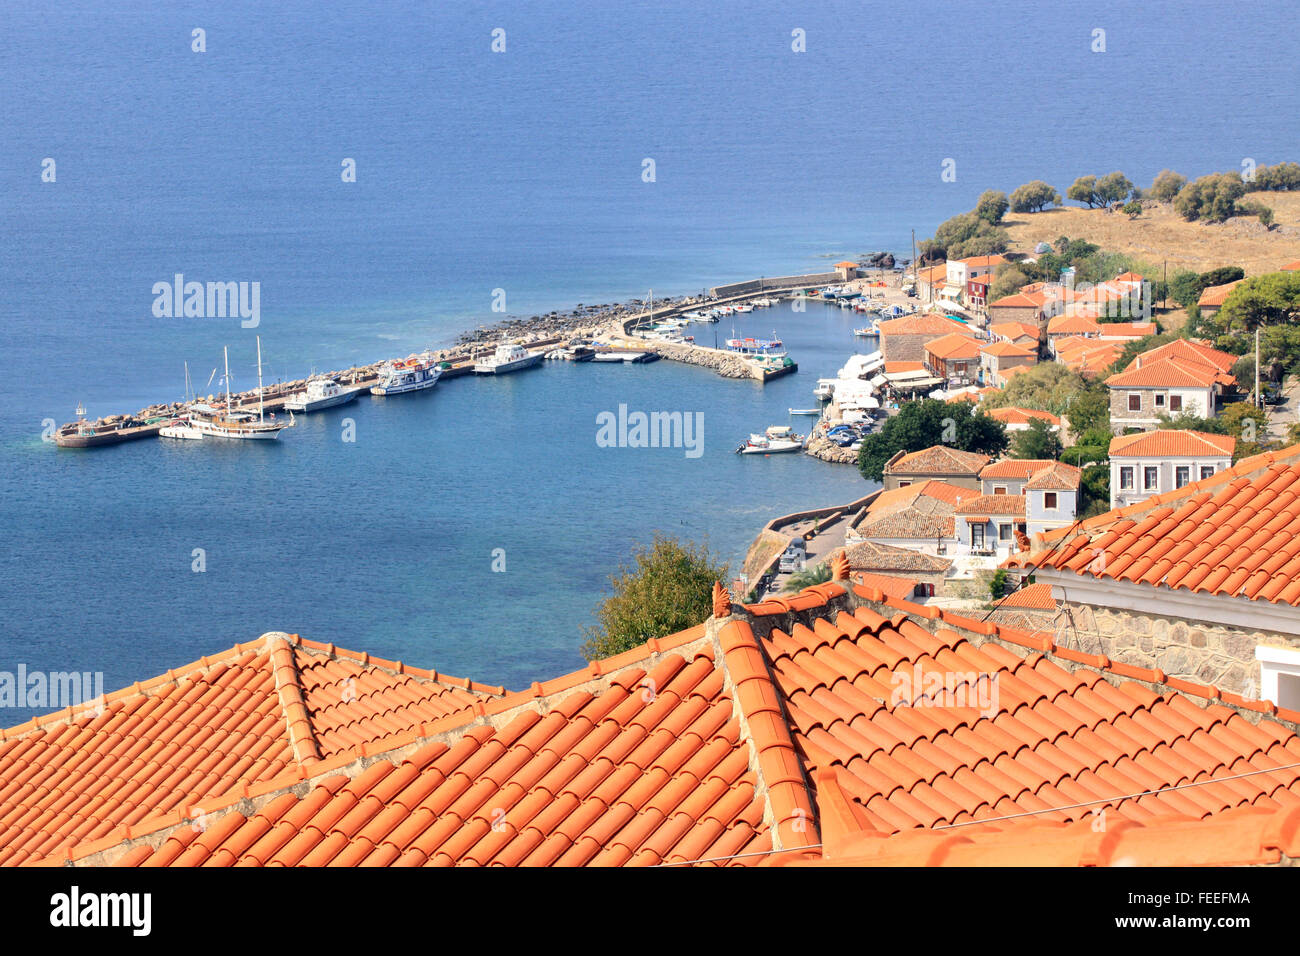 View over the red clay tiled rooftops towards the small fishing harbour at the Aegean sea resort of Molyvos on the Greek Island of Lesbos Greece Stock Photo